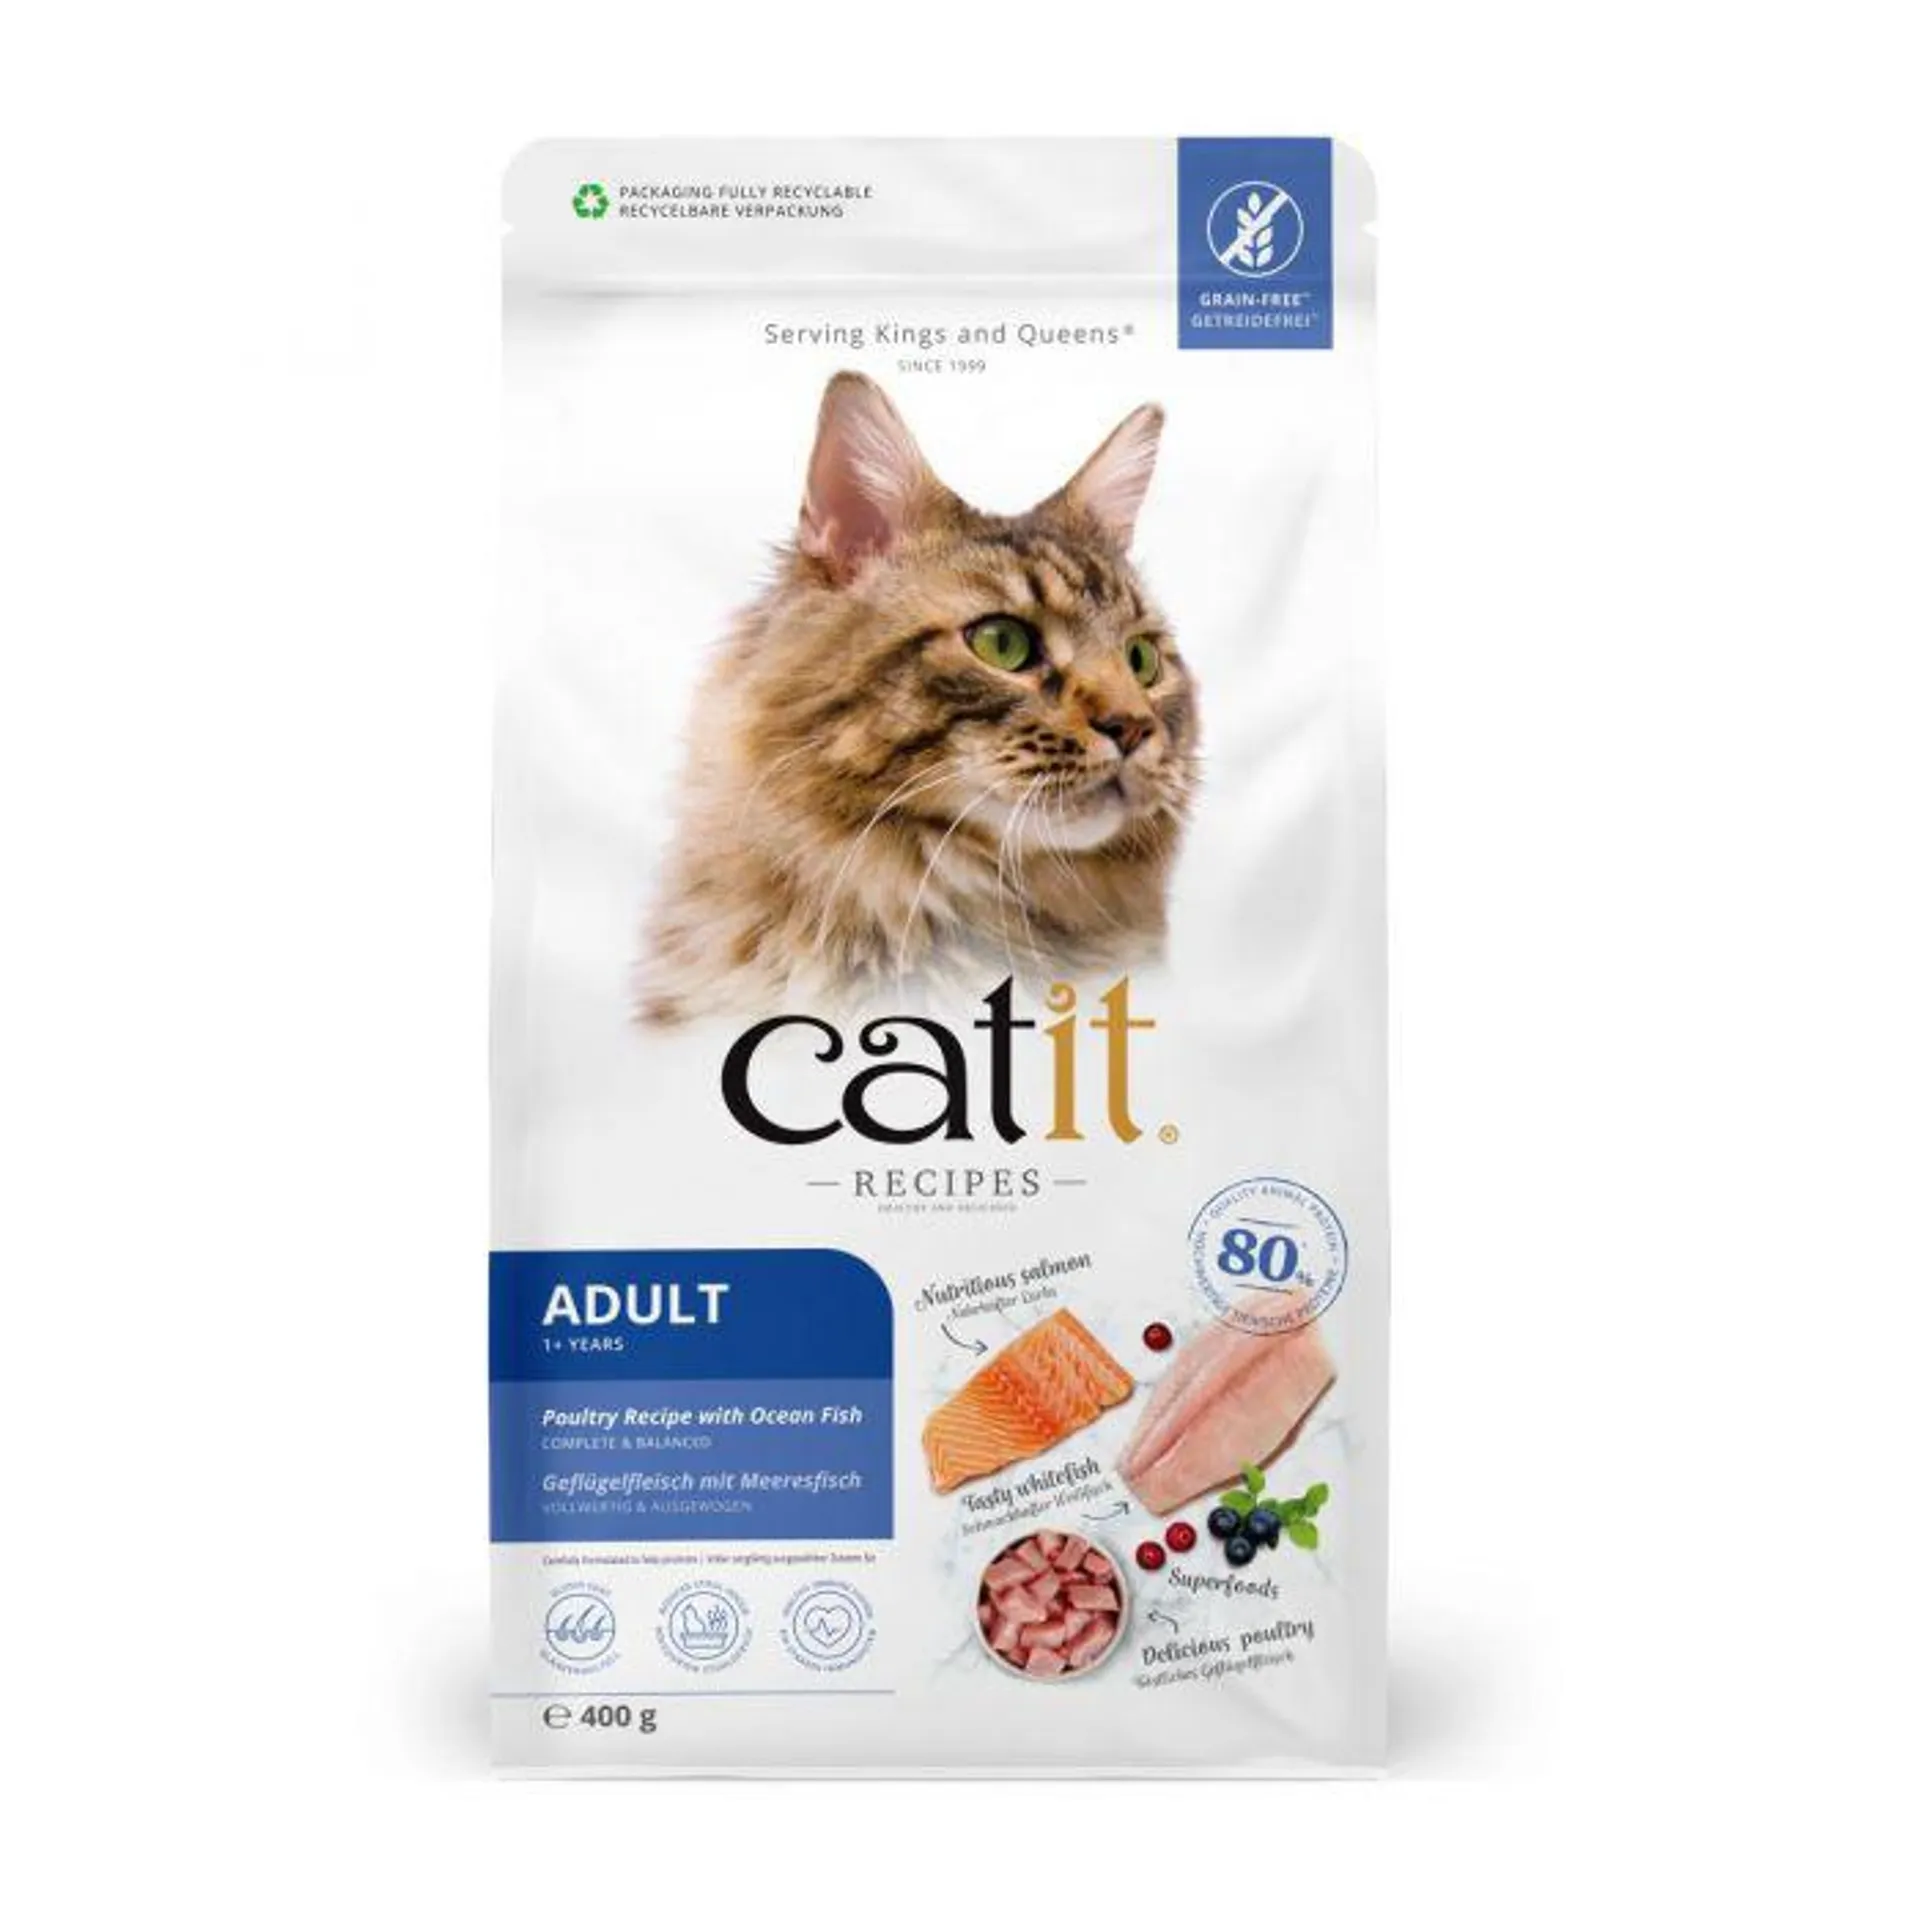 Catit Recipes Adult Poultry Recipe with Ocean Fish, 400g